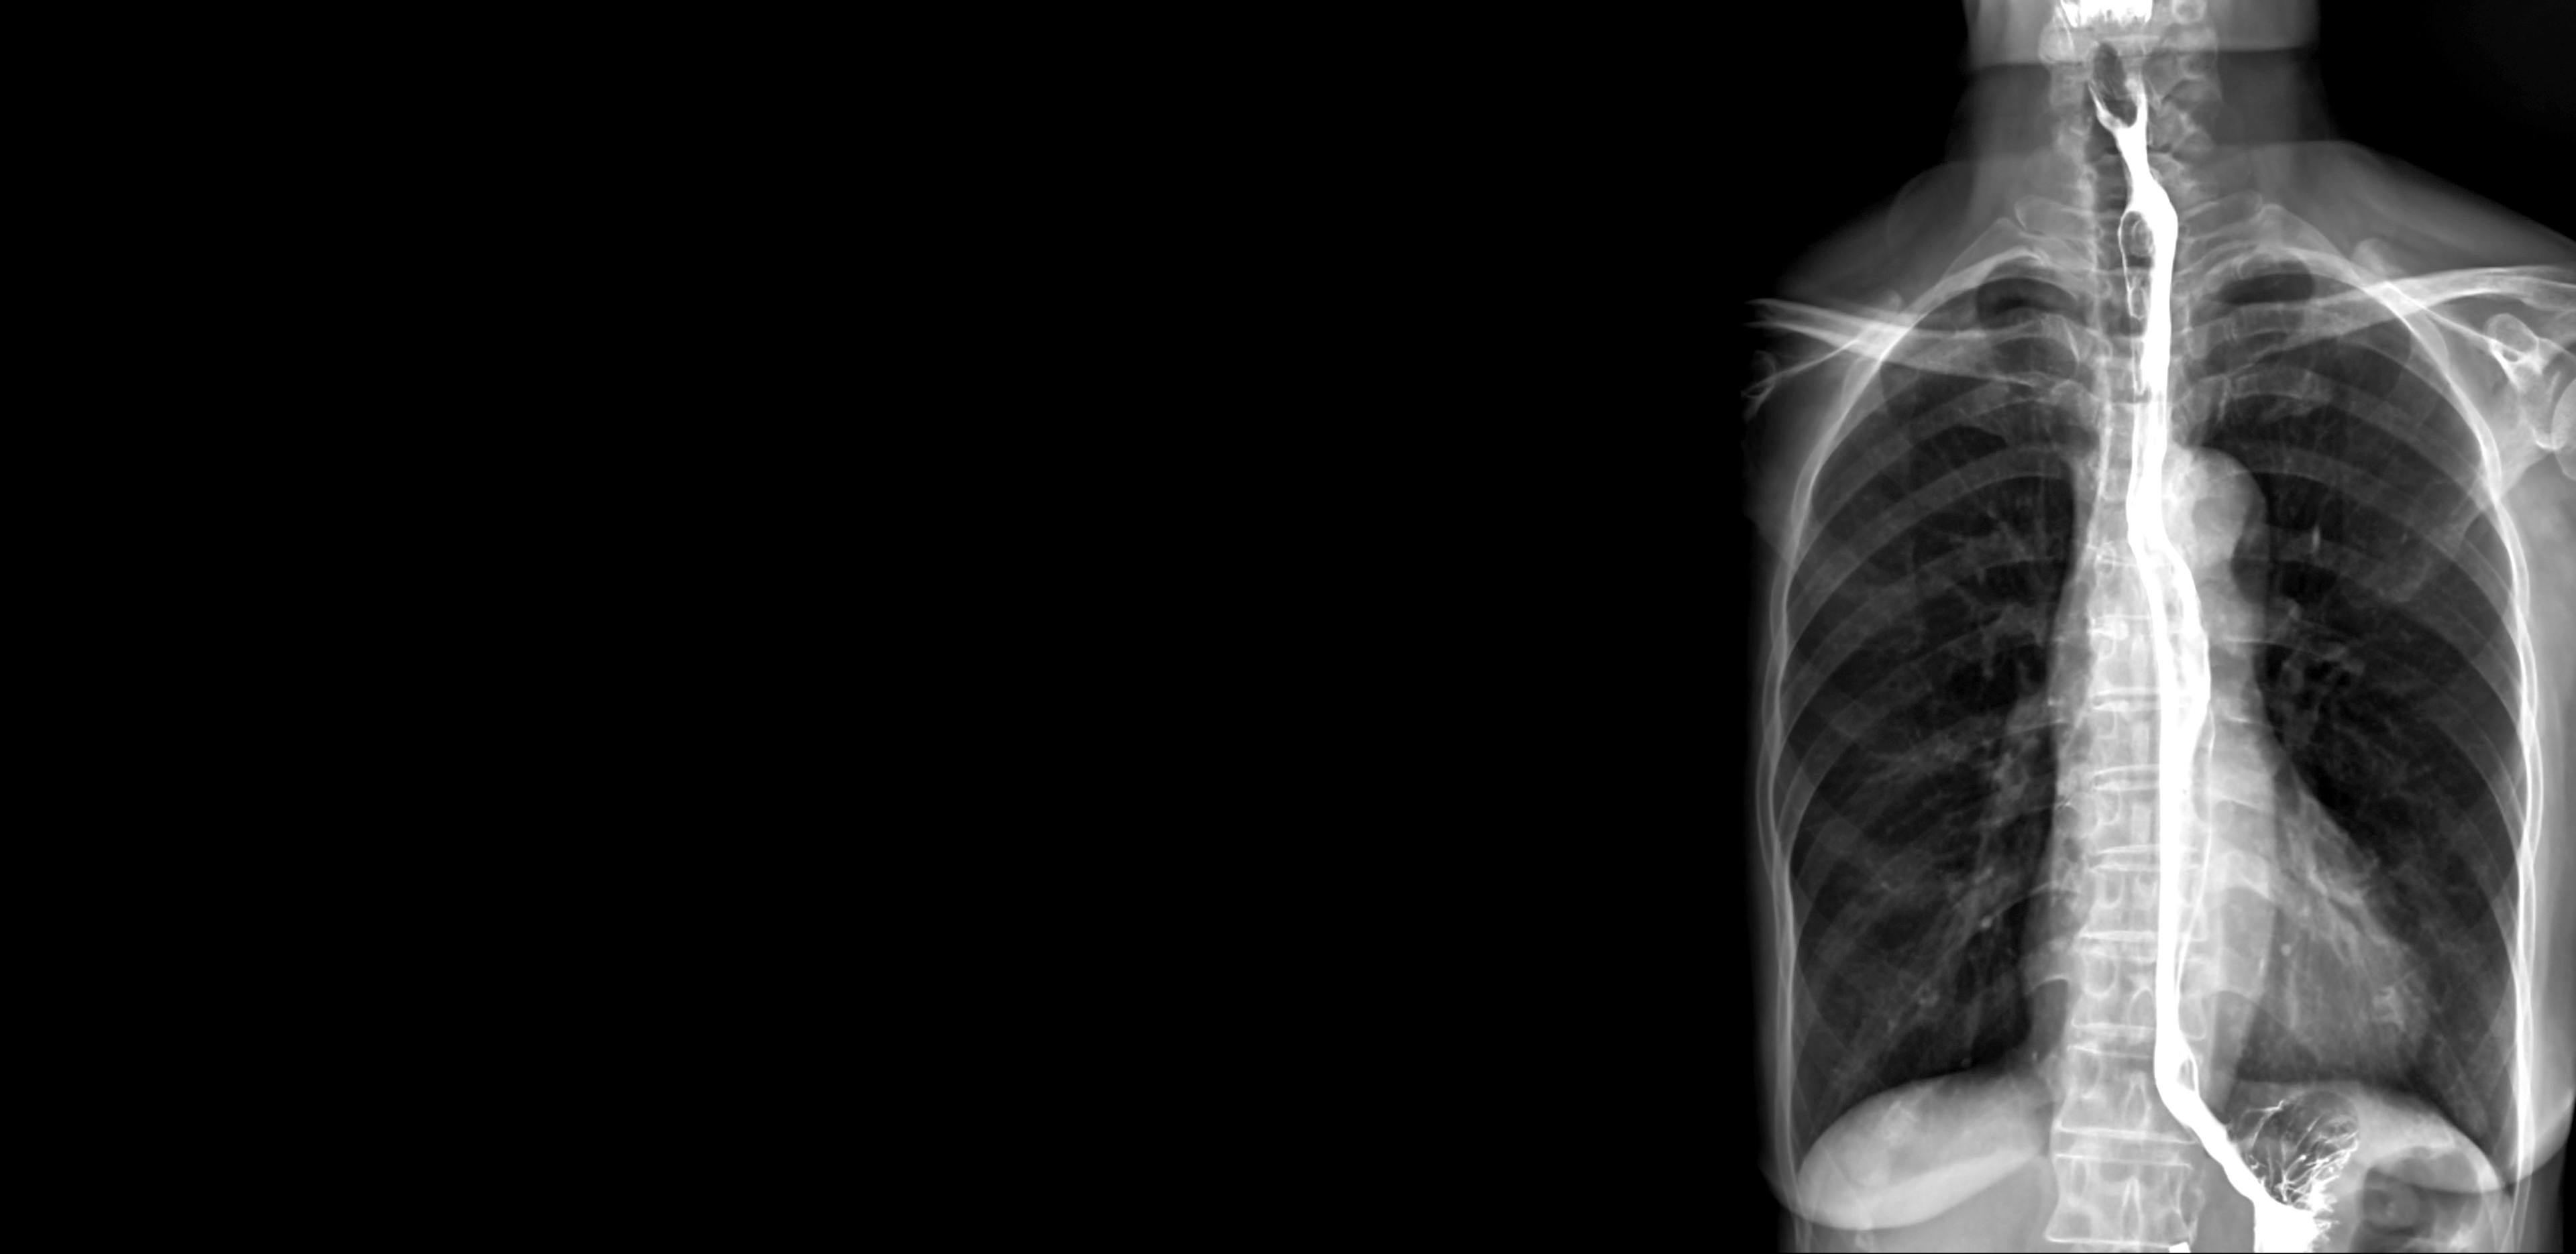 Esophagram or Barium swallow AP view is an X-ray of the esophagus ,The patient drinks a liquid that contains barium .The liquid coats the esophagus and X-rays are taken for finding cancer | Image credit: - © samunella - © stock.adobe.com